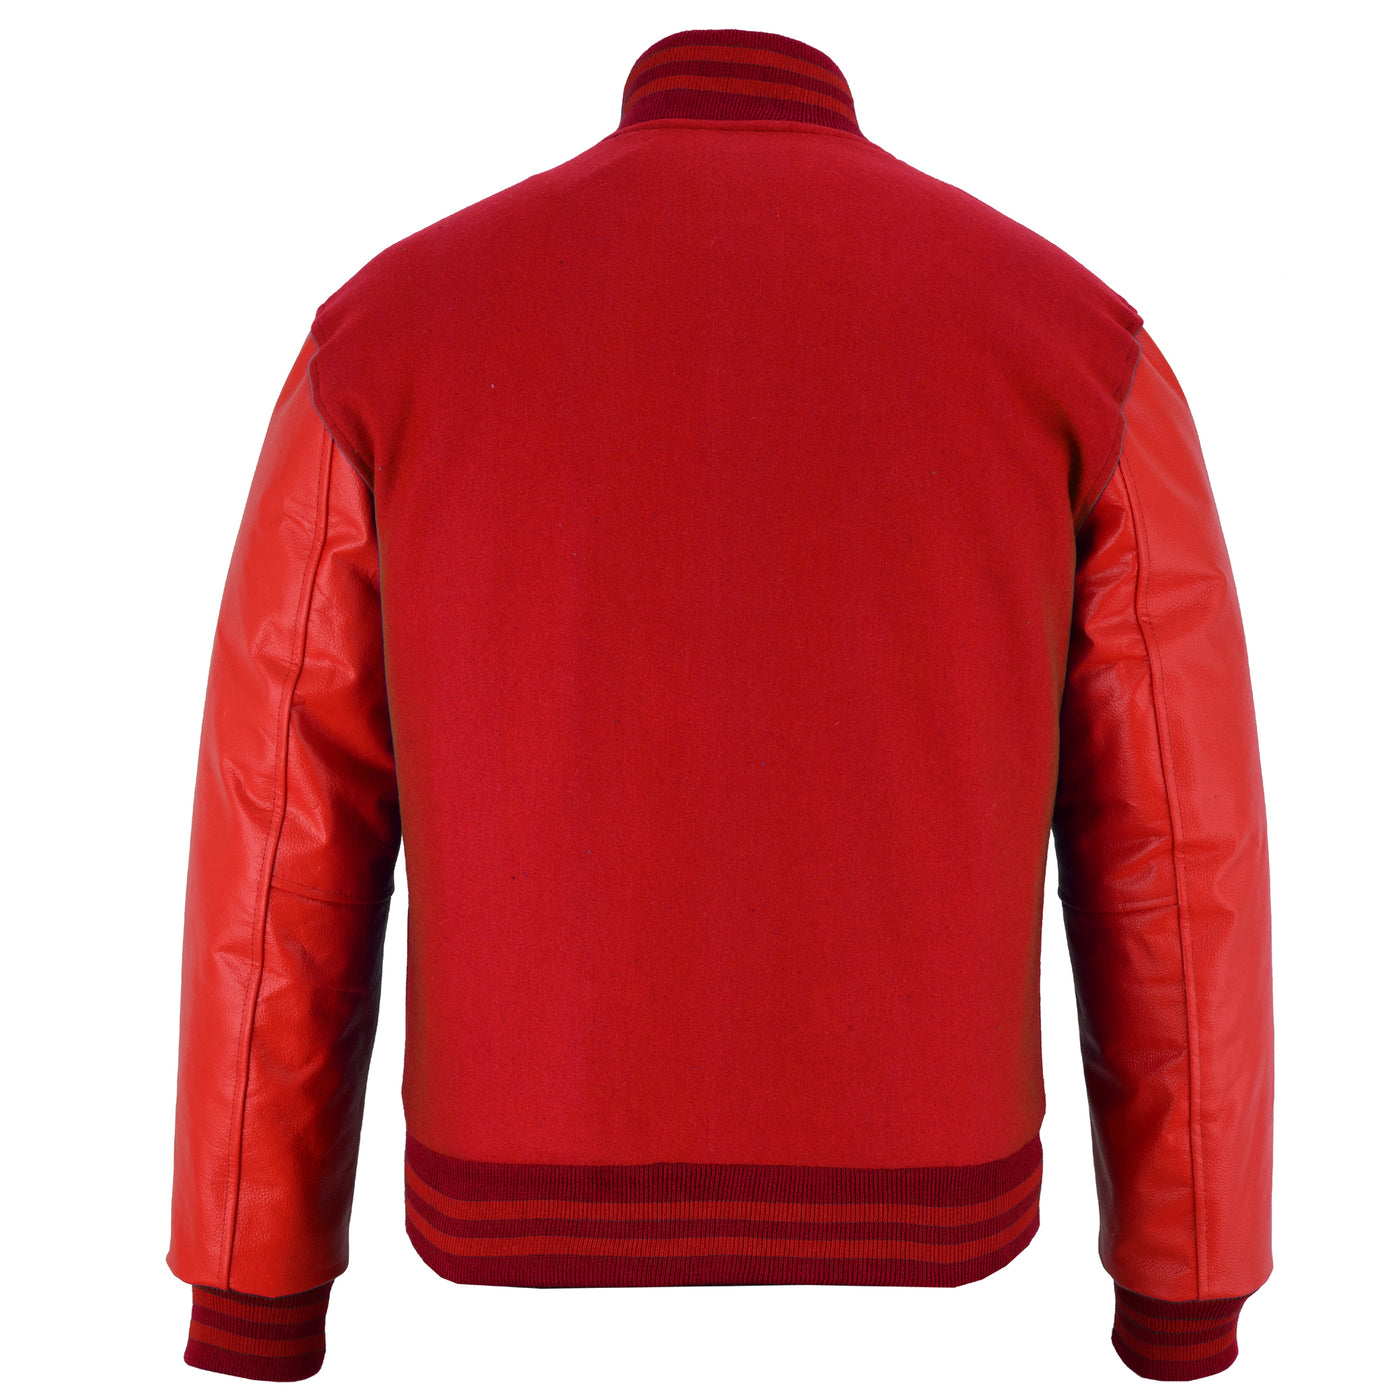 Classic Varsity Letterman Jacket Red Wool with Red Genuine Leather Sleeves and trims